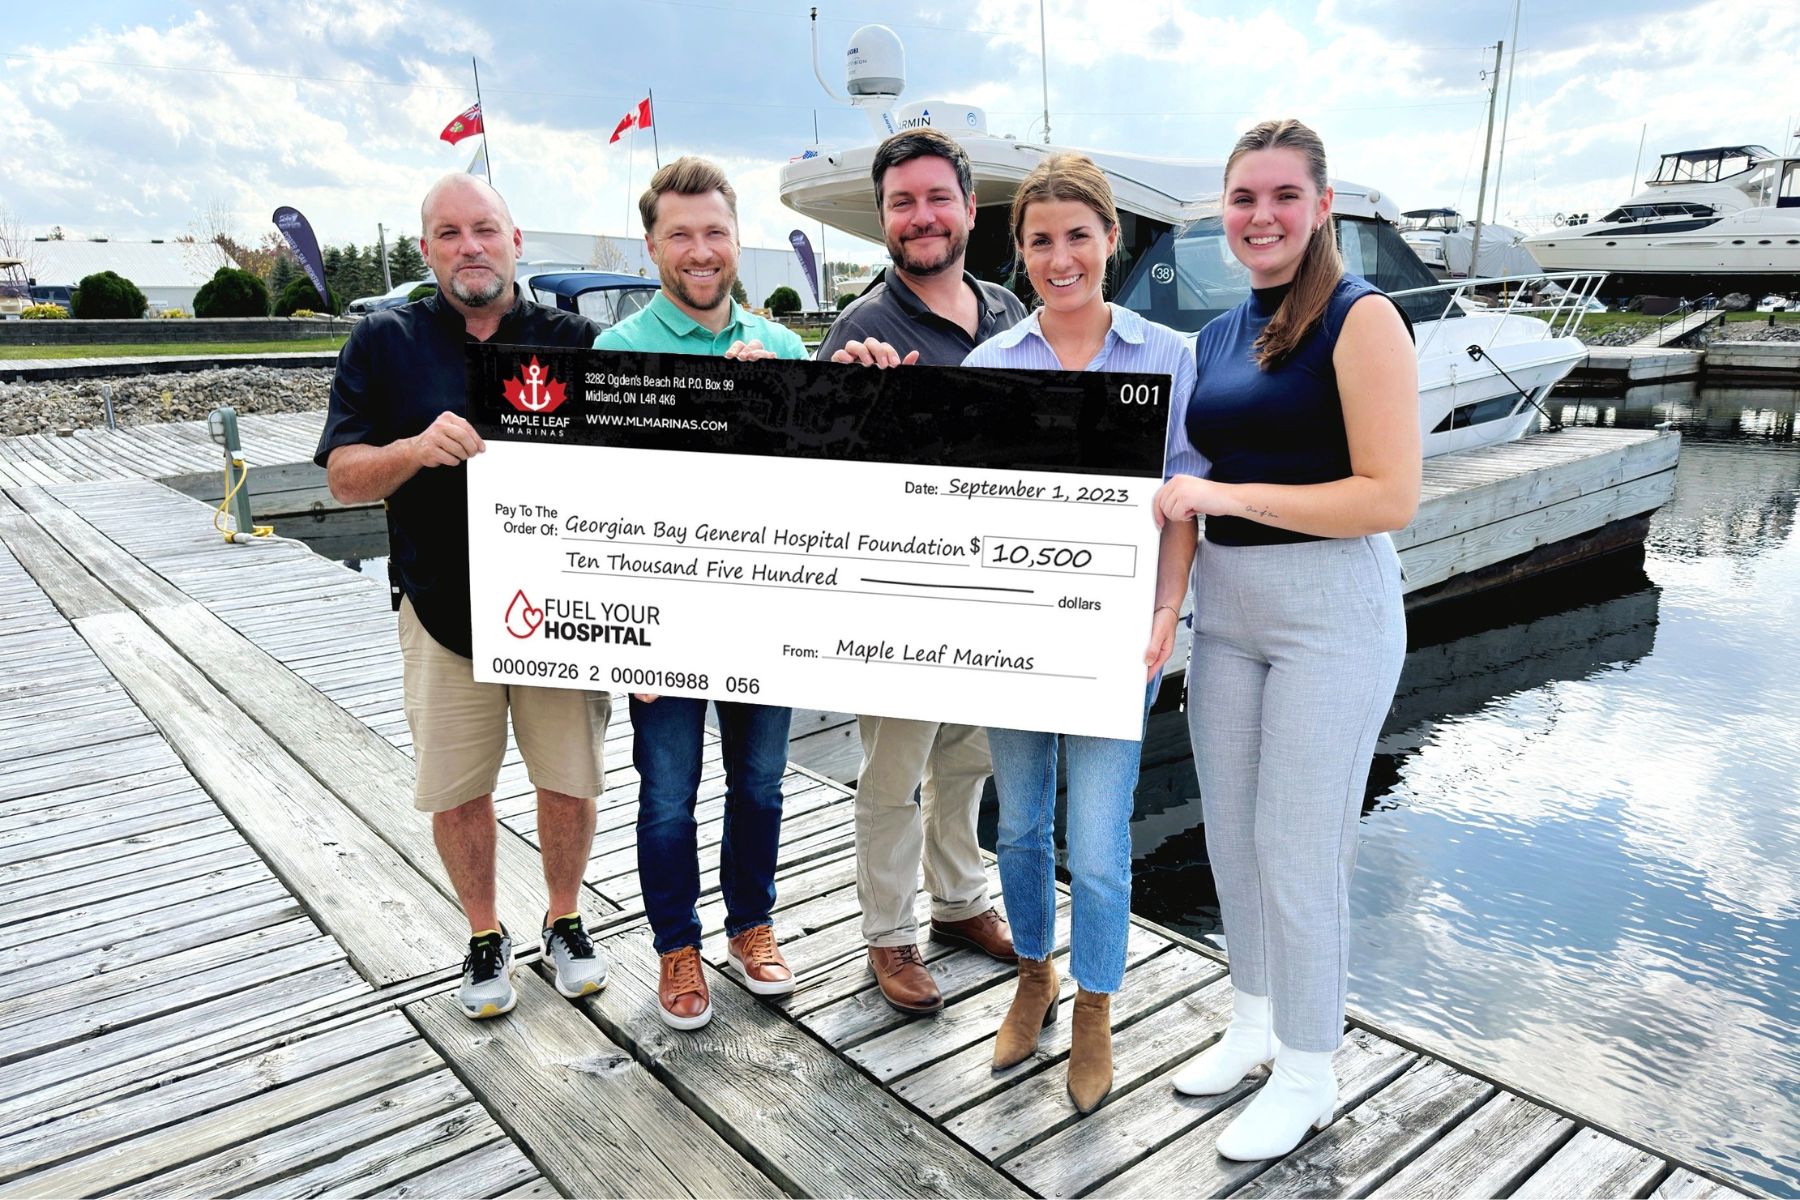 Two women and three men hold a giant cheque made out to GBGH Foundation for $10, 500 Fuel Your Hospital - Maple Leaf Marina